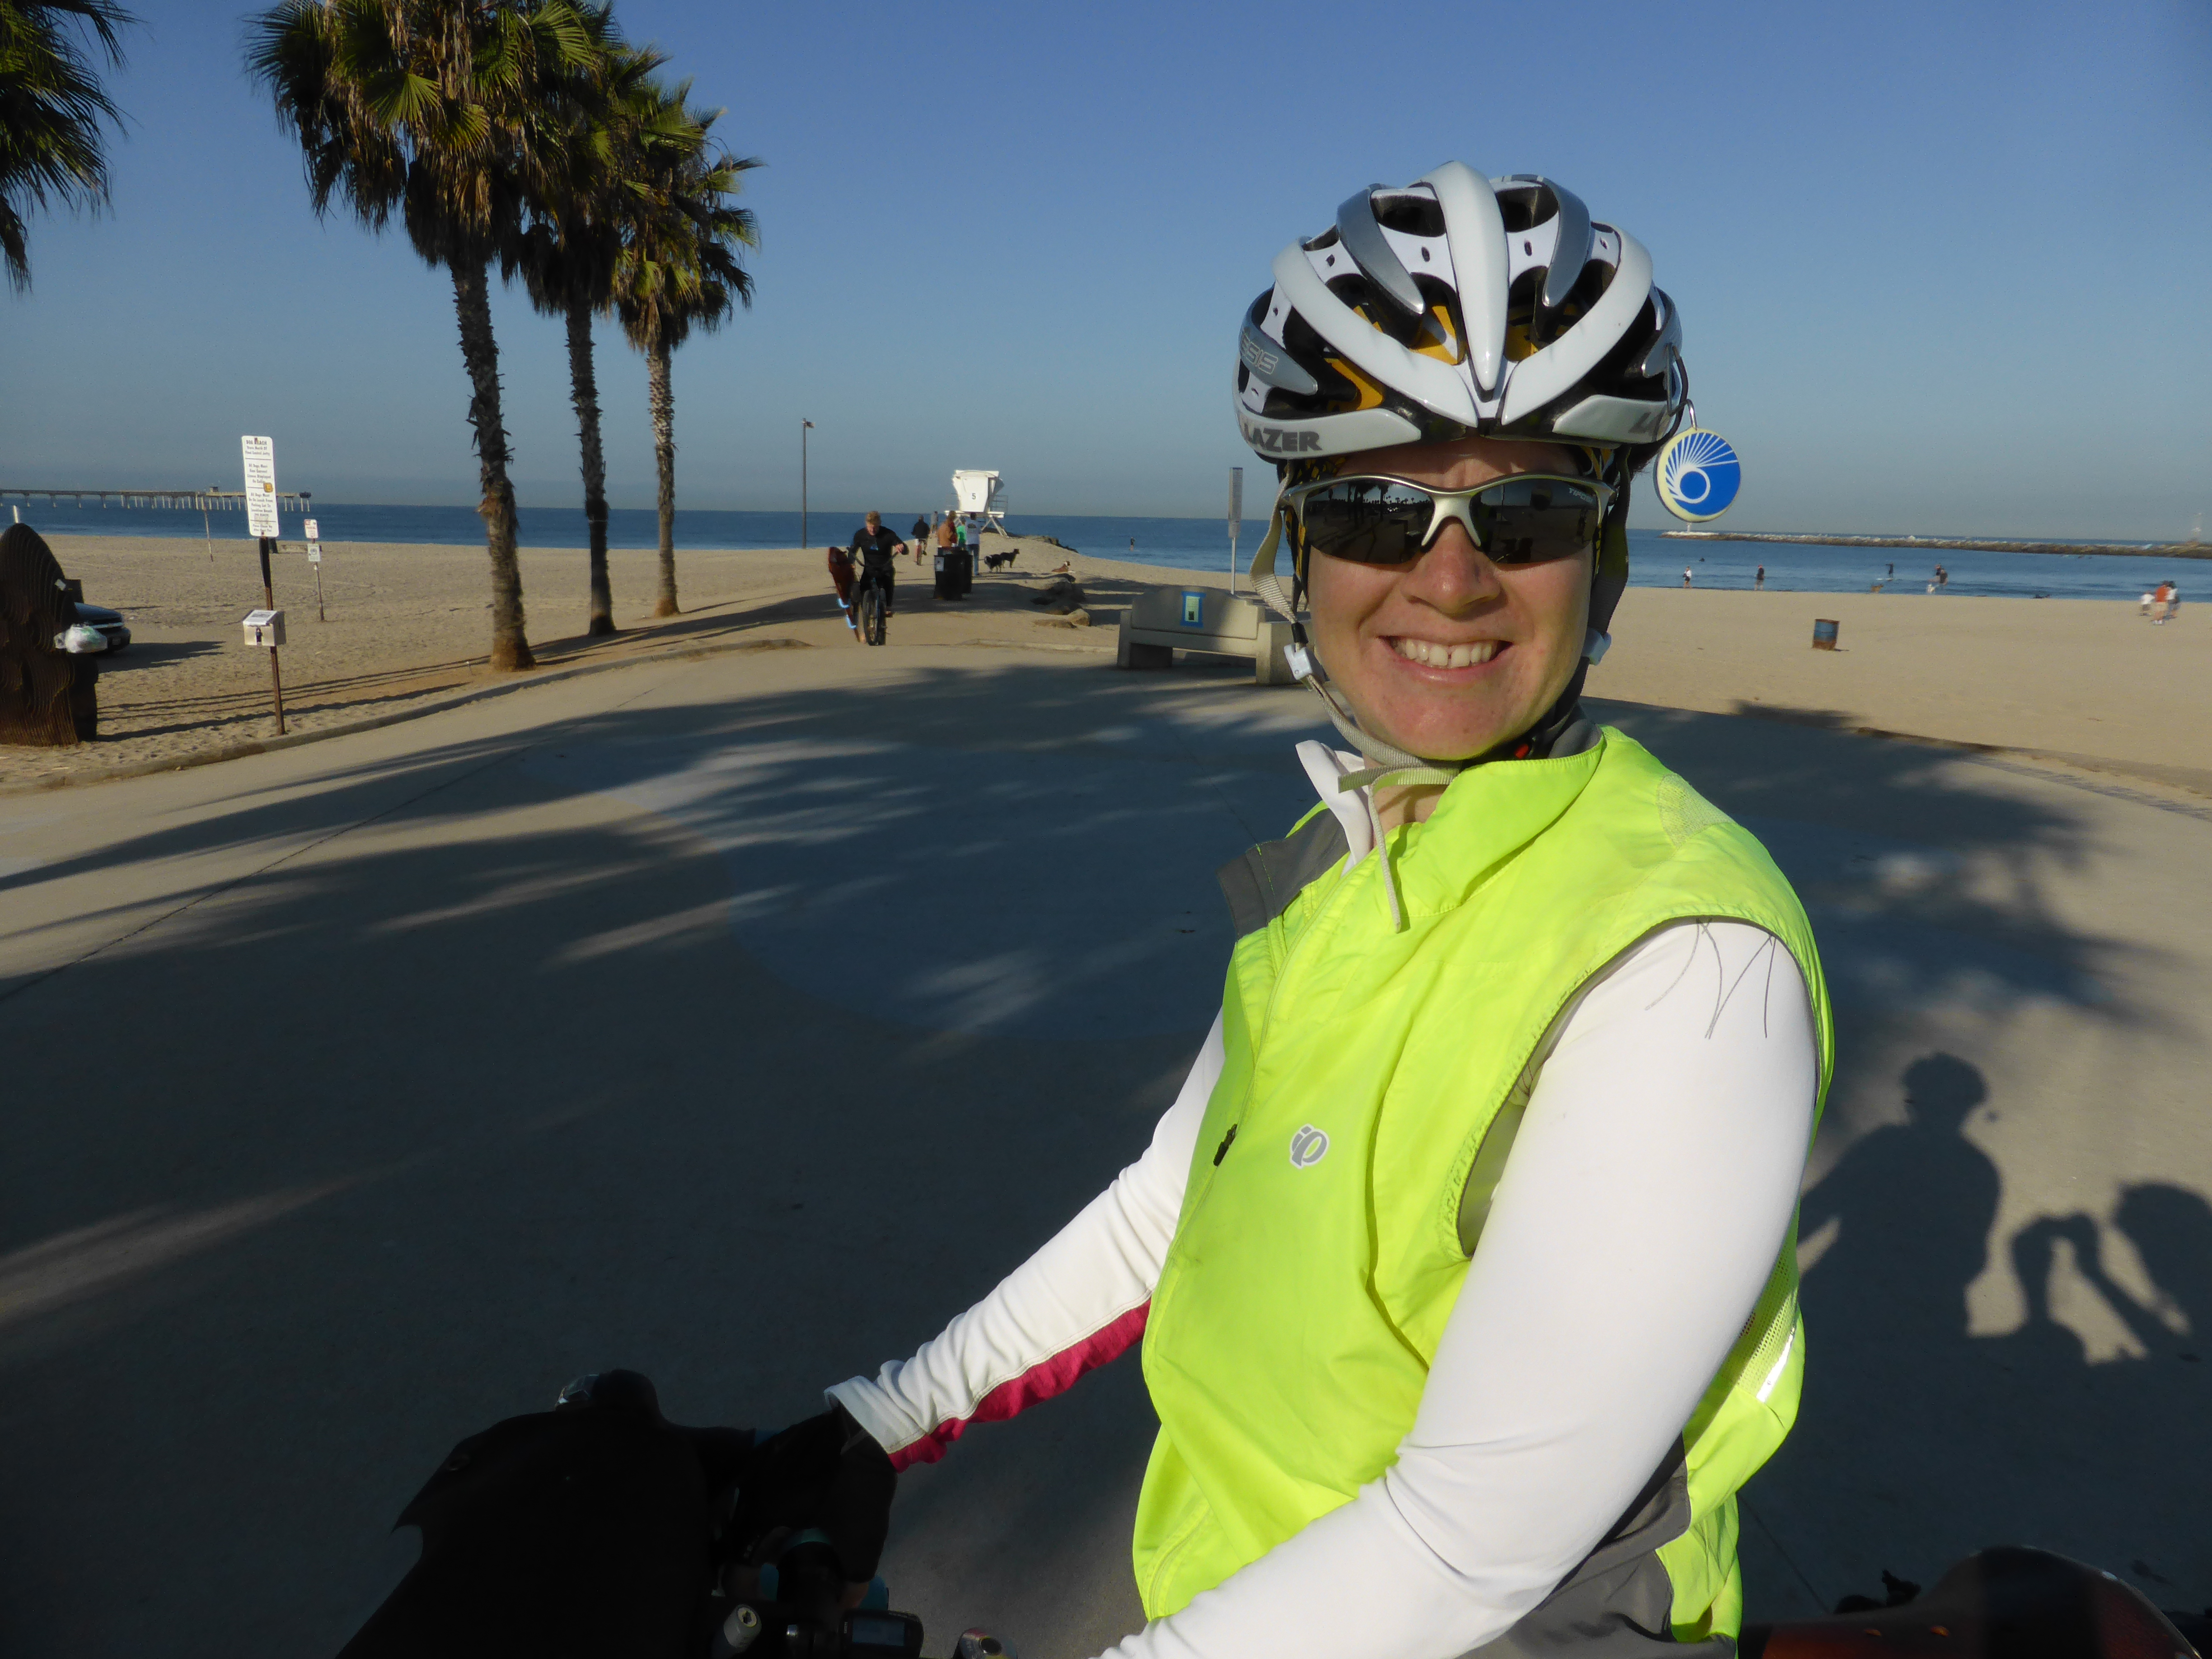 A cyclist faces the camera and smiles with a bike path in the background.